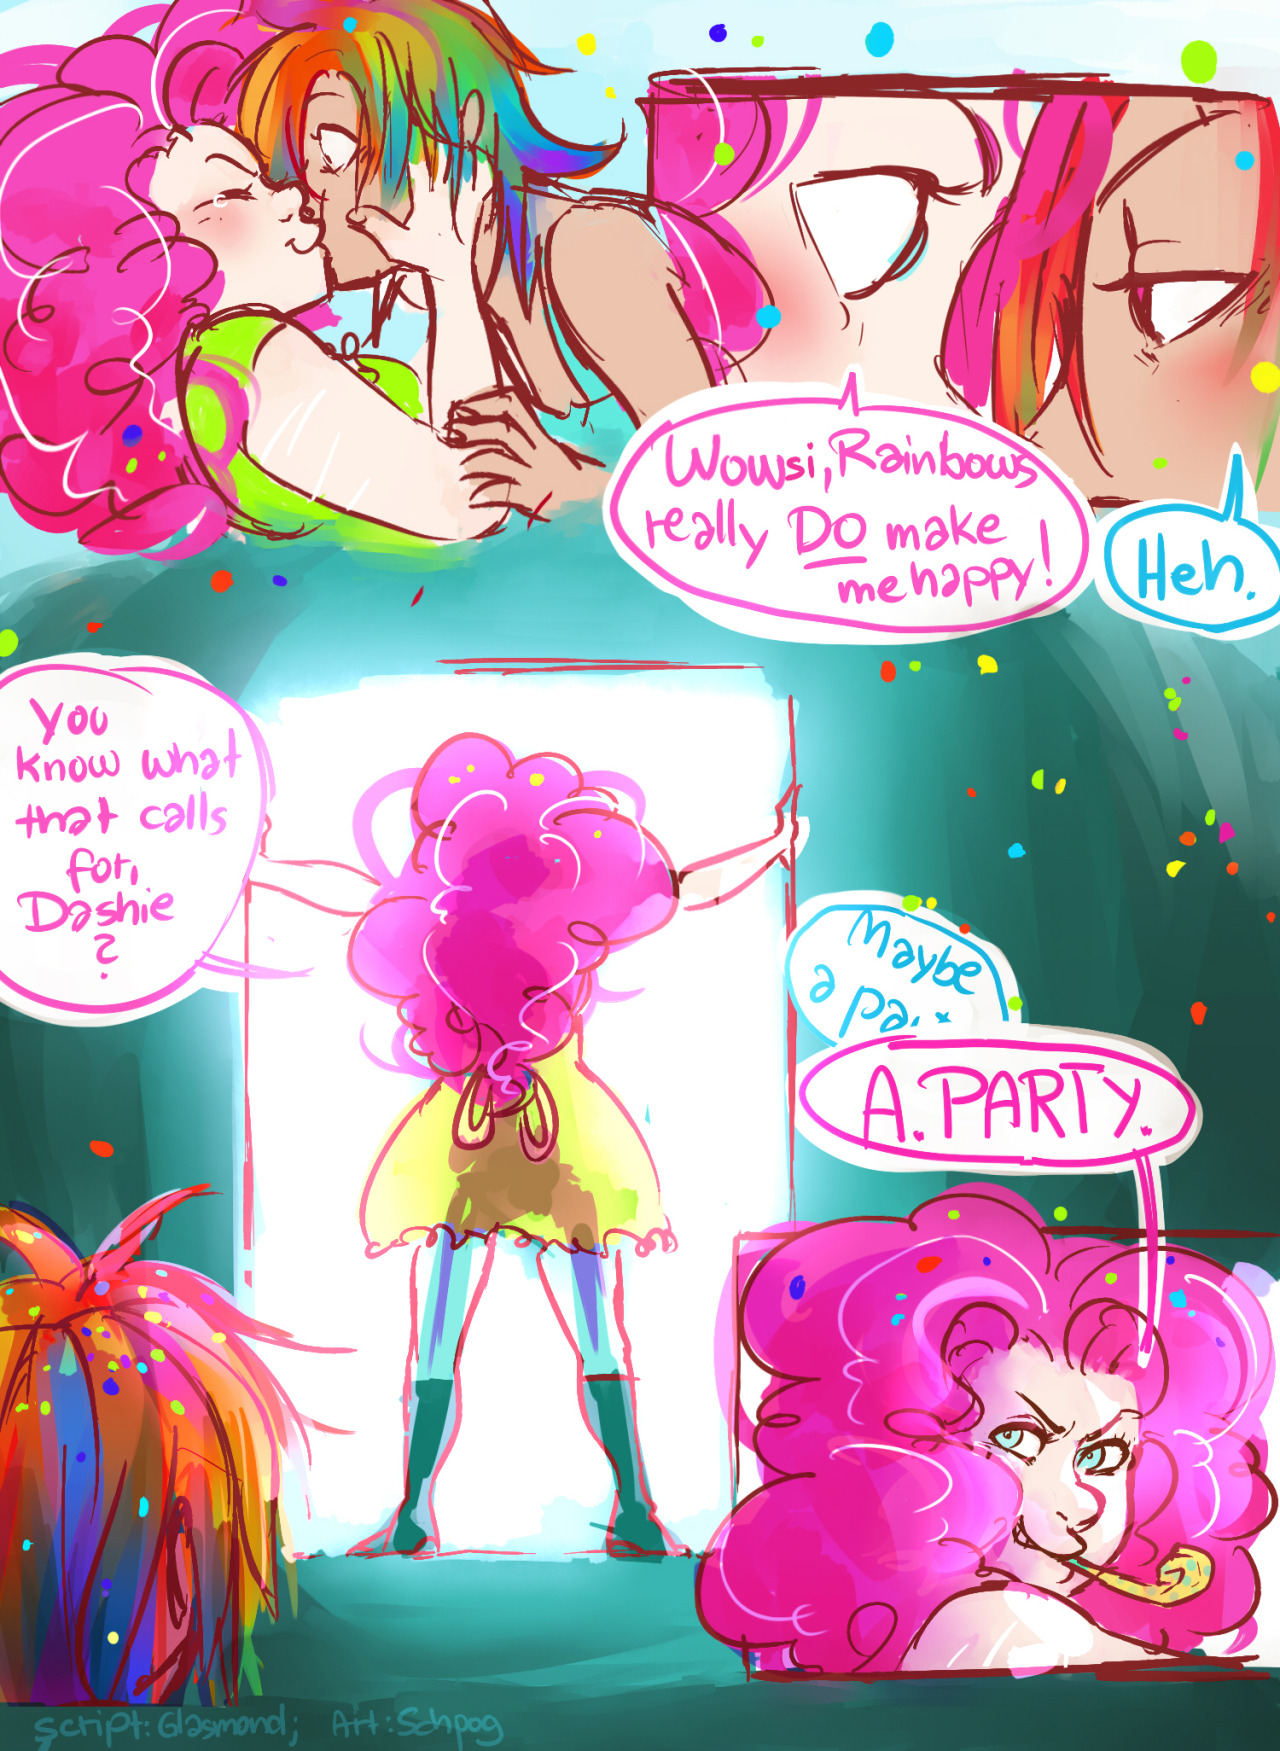 human-pinkie-pie:  askhumanappledash:  RD:  *cough*   IT’S GOOD TO BE BACK  It&rsquo;s